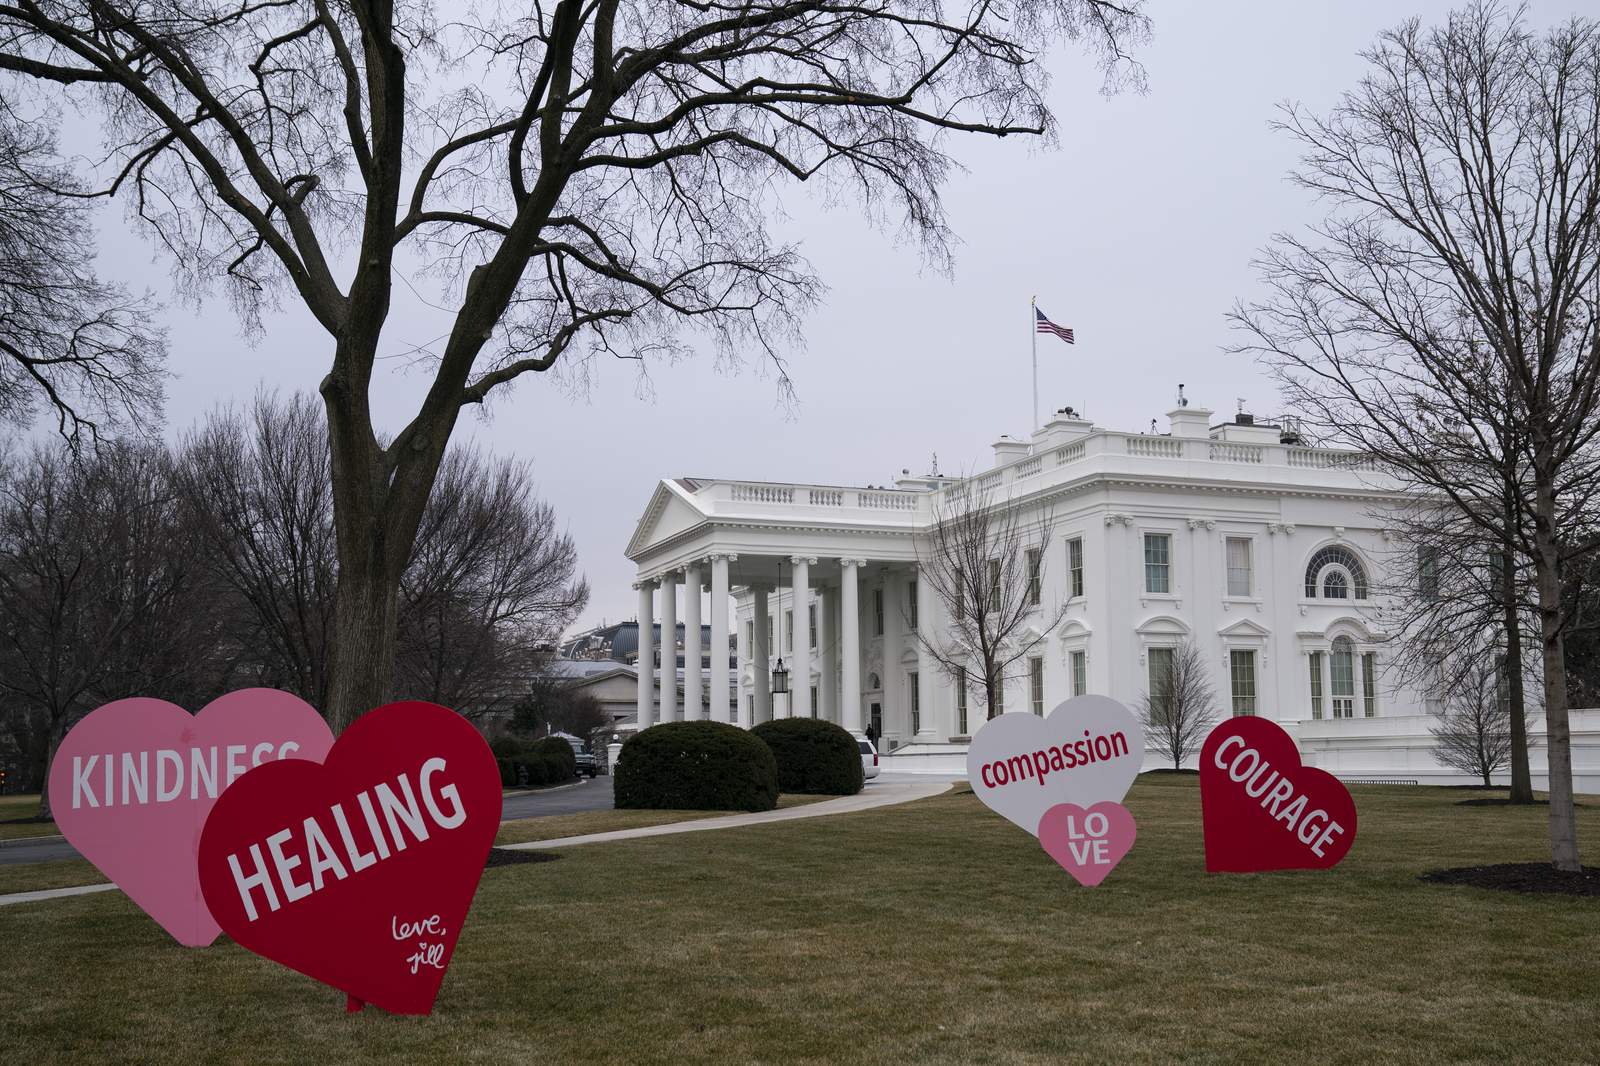 Bidens view Valentine's Day decorations on White House lawn